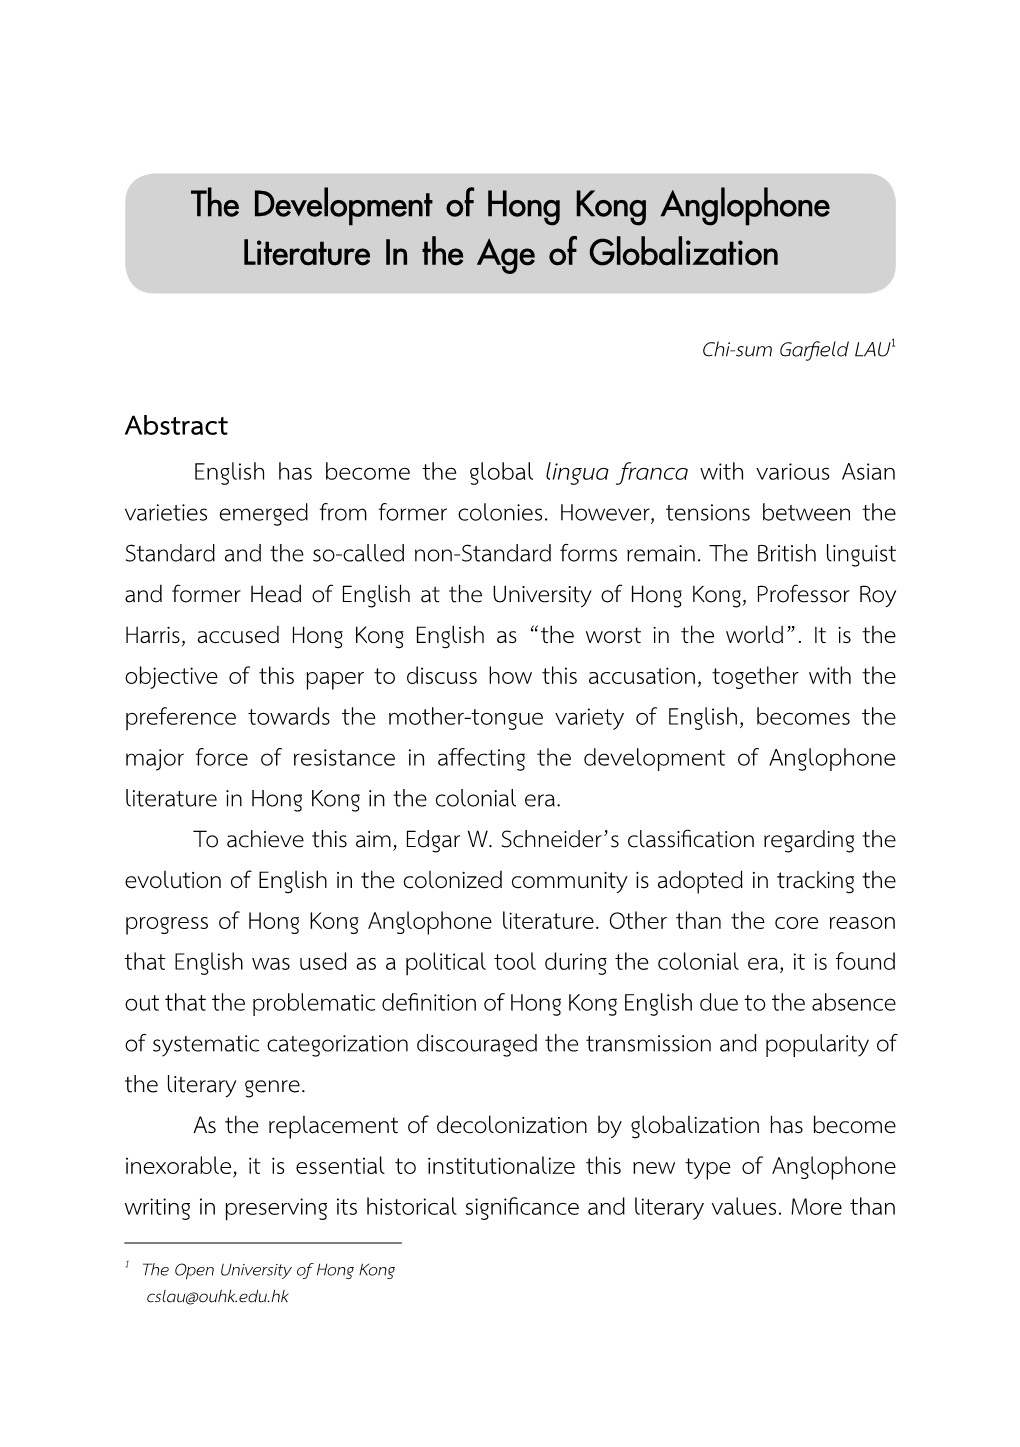 The Development of Hong Kong Anglophone Literature in the Age of Globalization